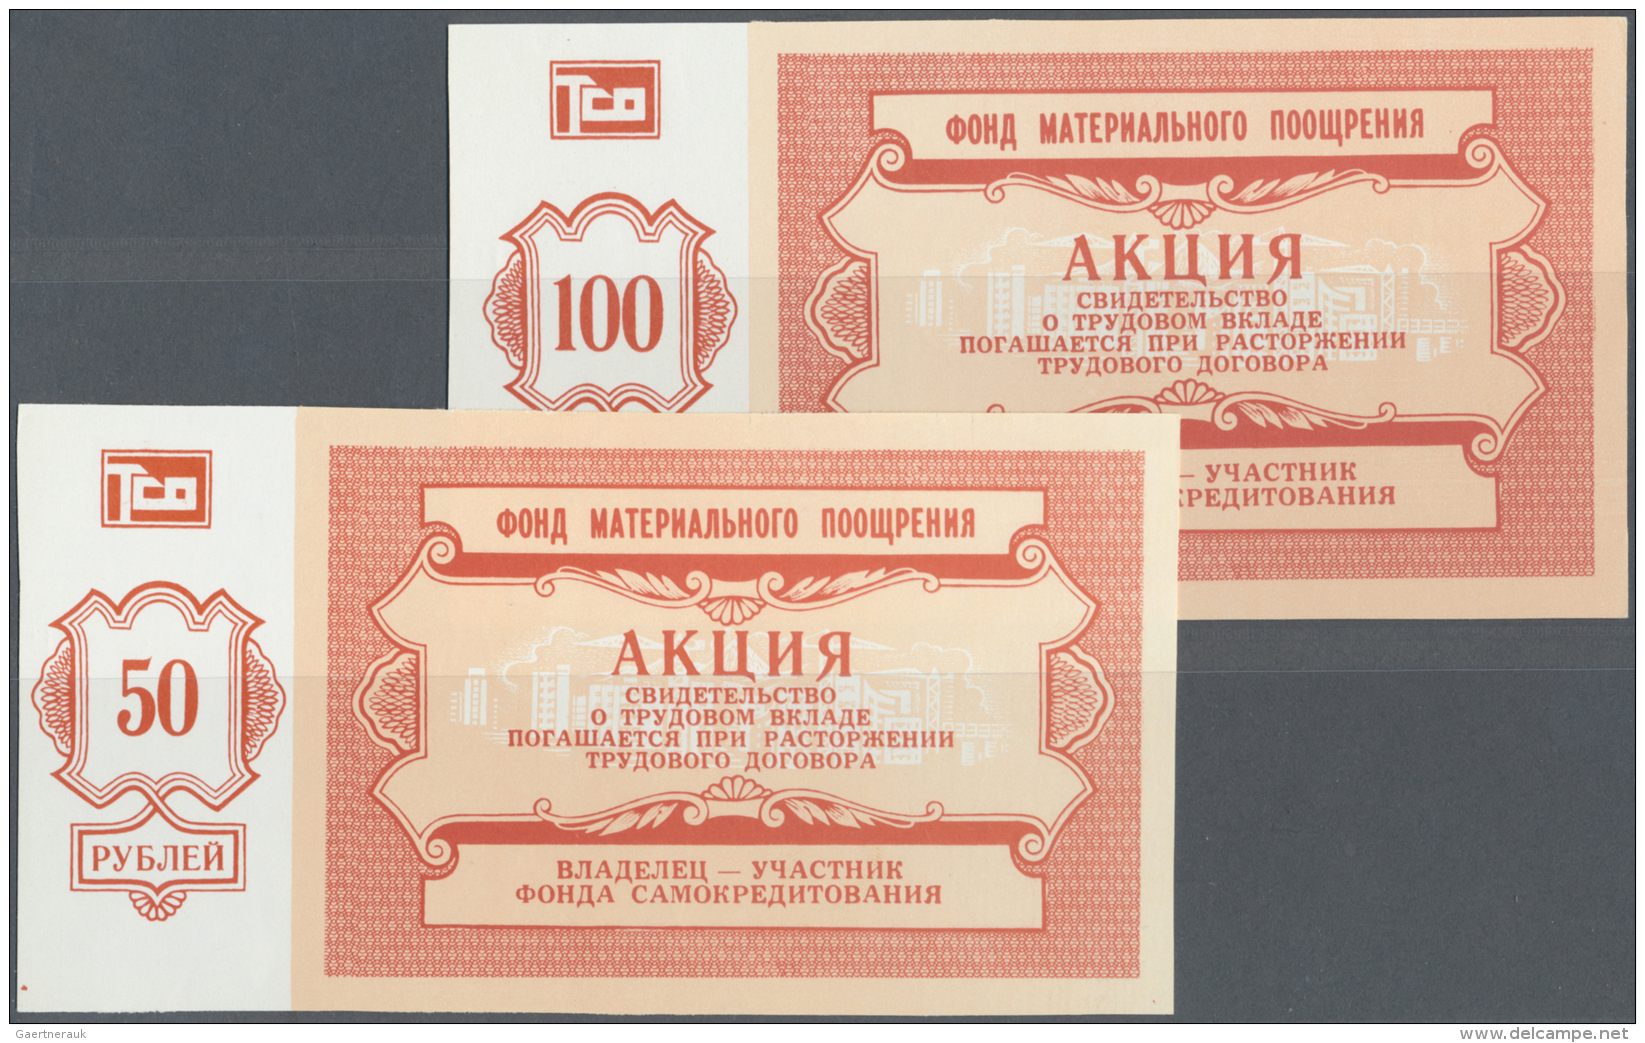 Russia / Russland: USSR Savings Bank Of Kamchatka 50 And 100 Rubles Certificates On Normal Paper In UNC Condition (2 Pcs - Russie